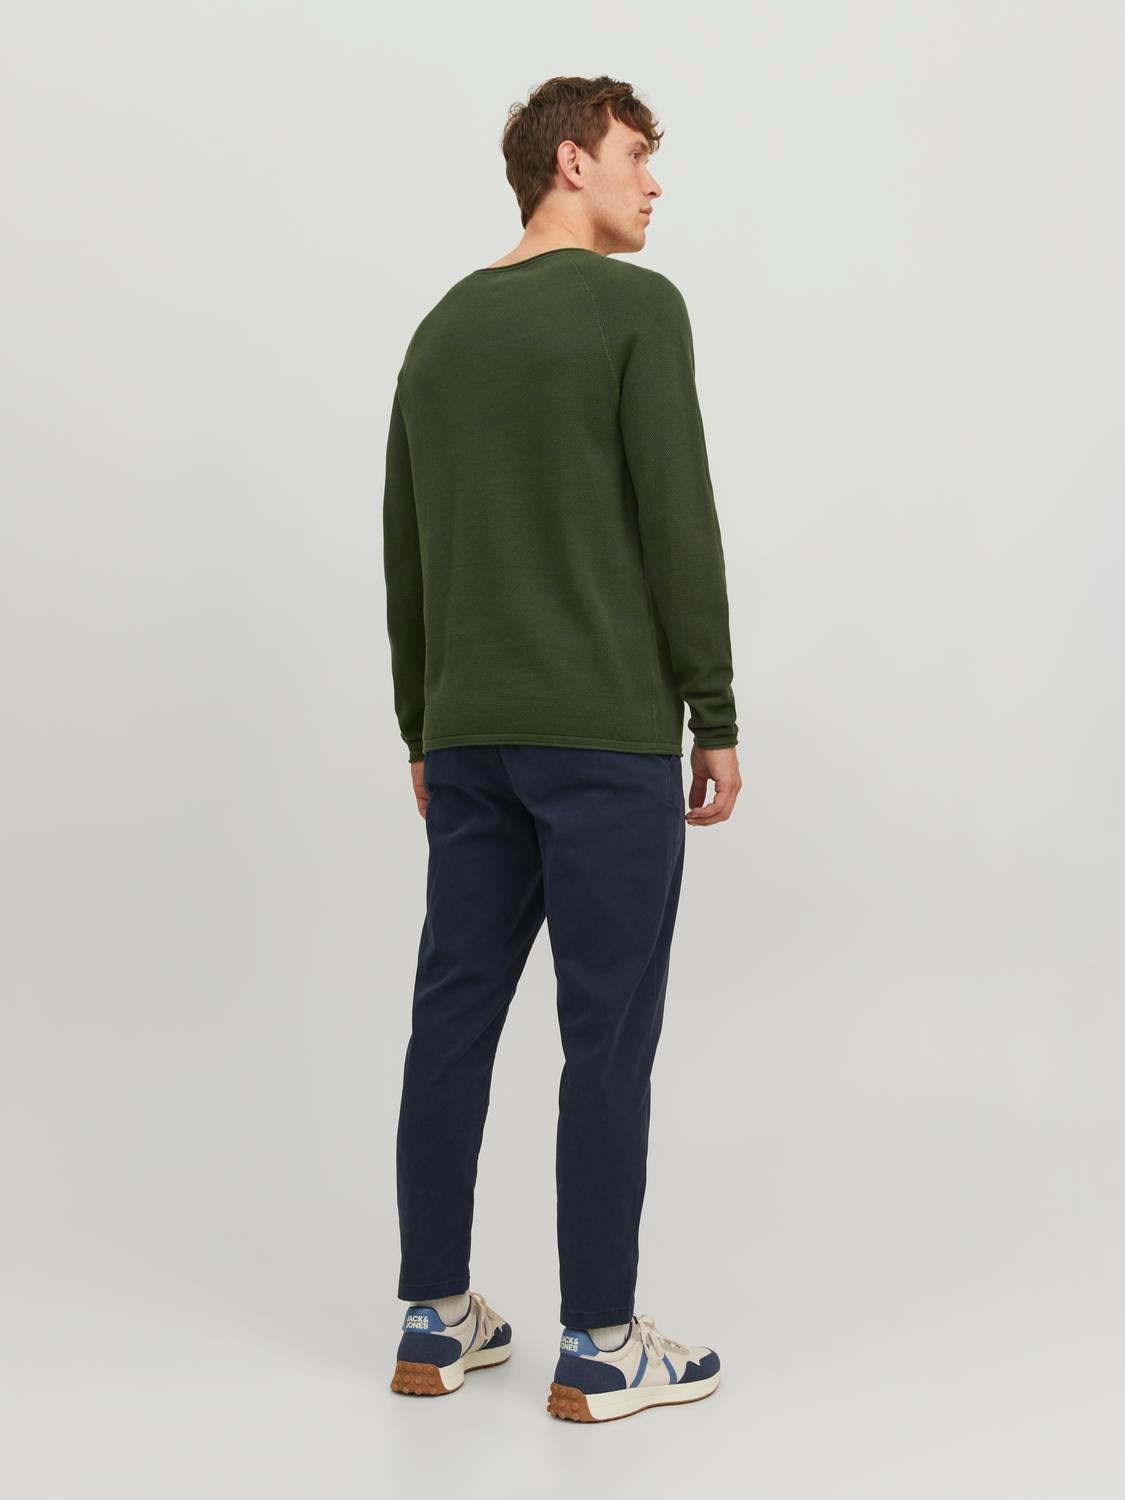 Jack & Jones Plain Knitted pullover -Mountain View - 12157321